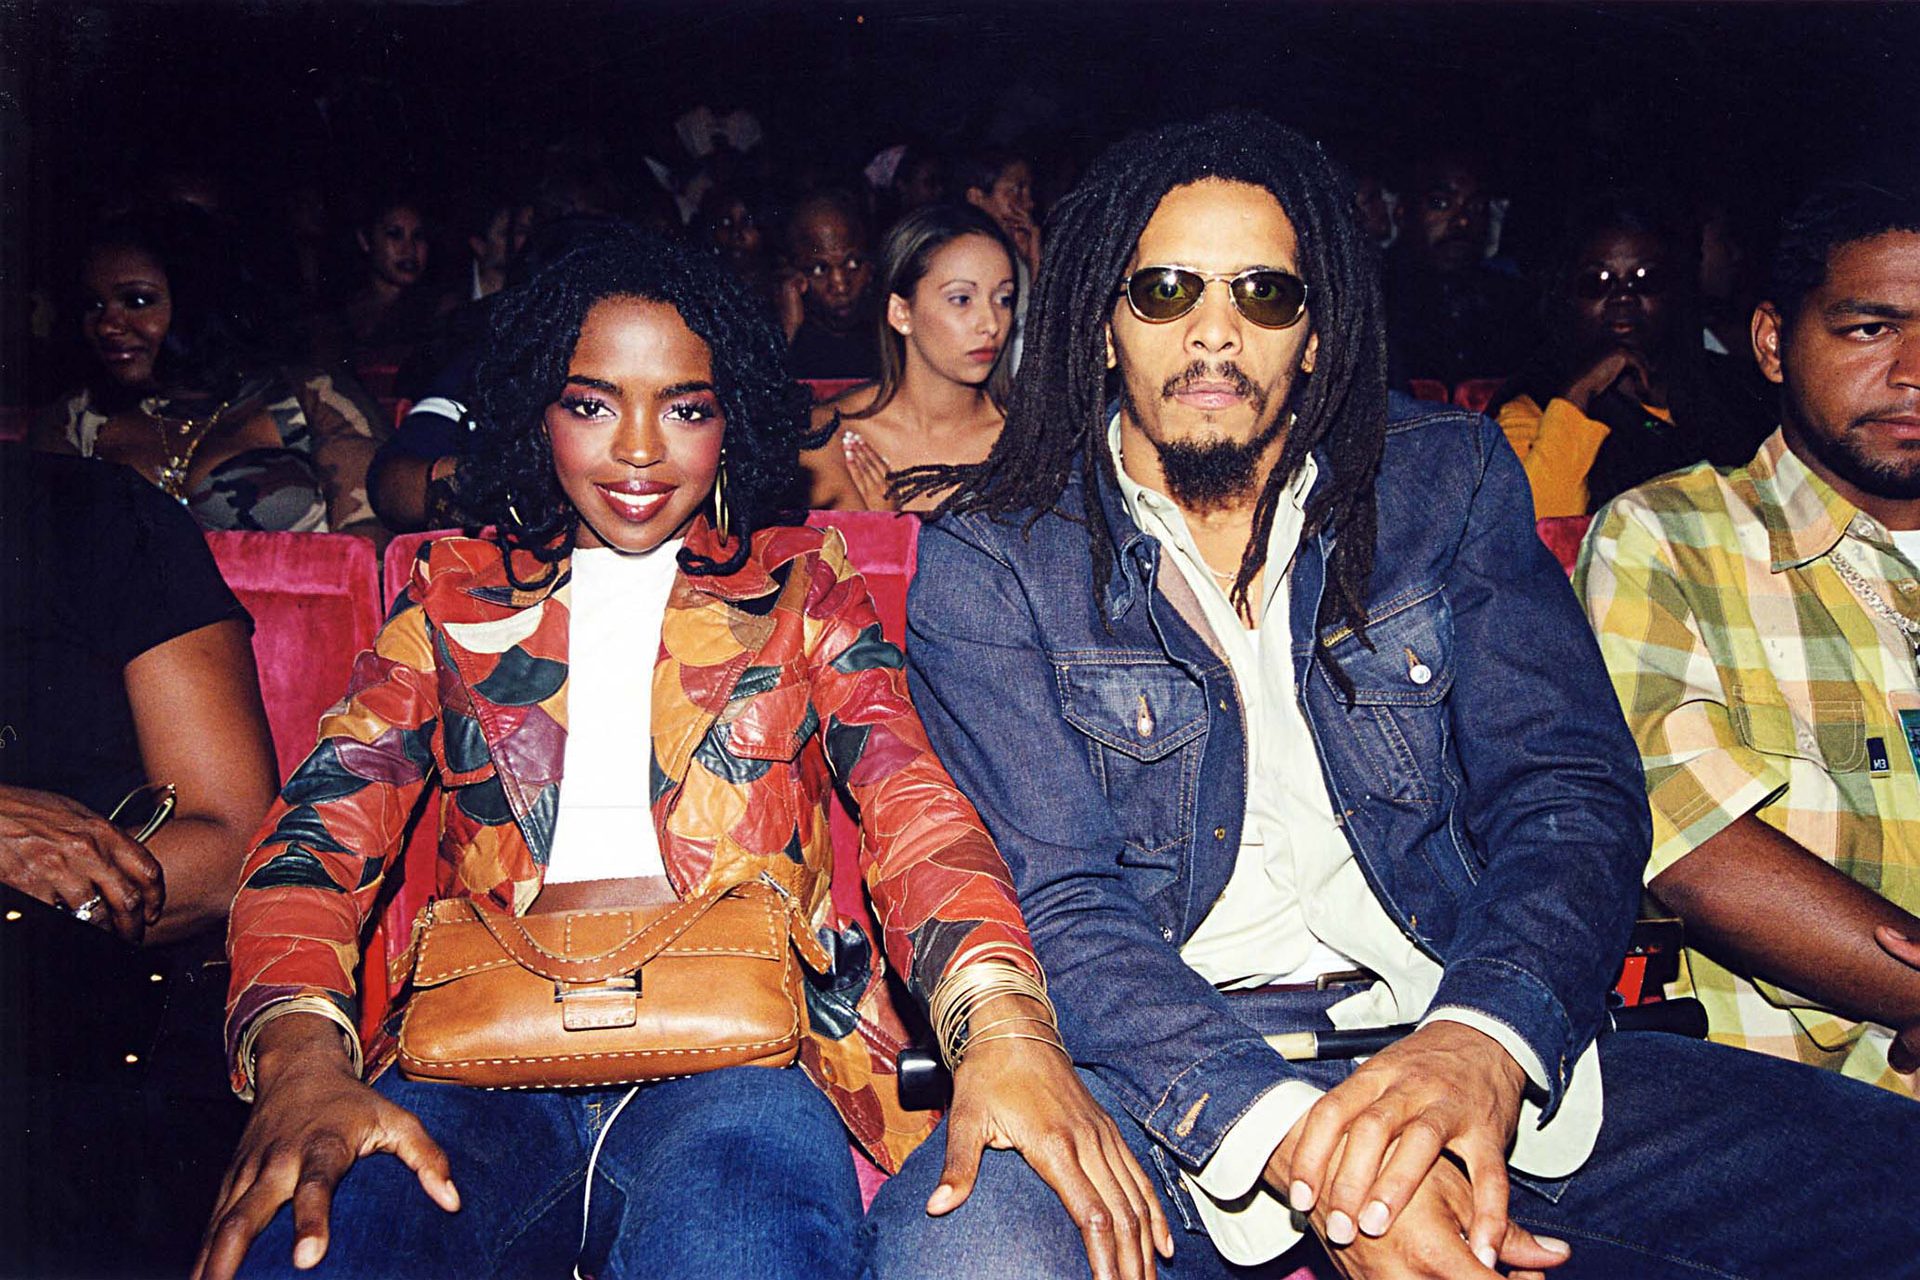 <p>It was before starting her new solo career that, in 1996, she met Rohan Marley, a professional American football player and son of the legendary Jamaican artist Bob Marley, with whom she would have a 15-year romantic relationship.</p>